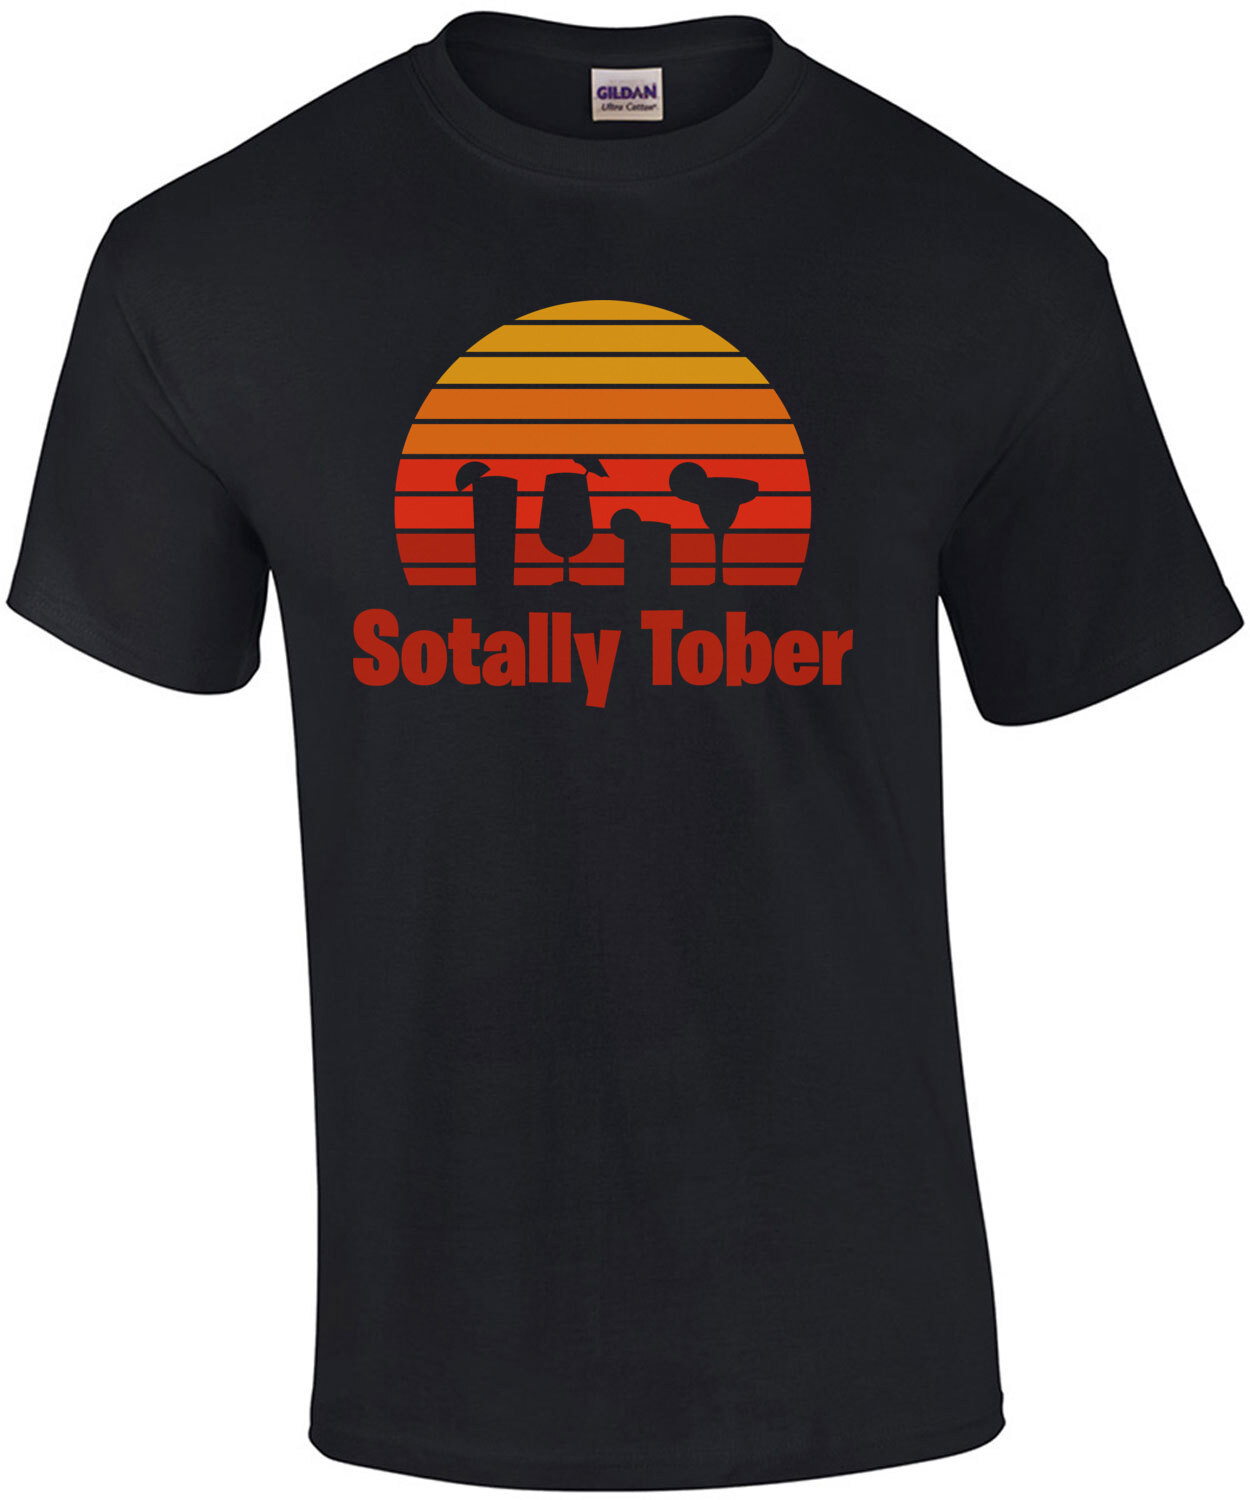 Sotally Tober - Funny Drinking T-Shirt